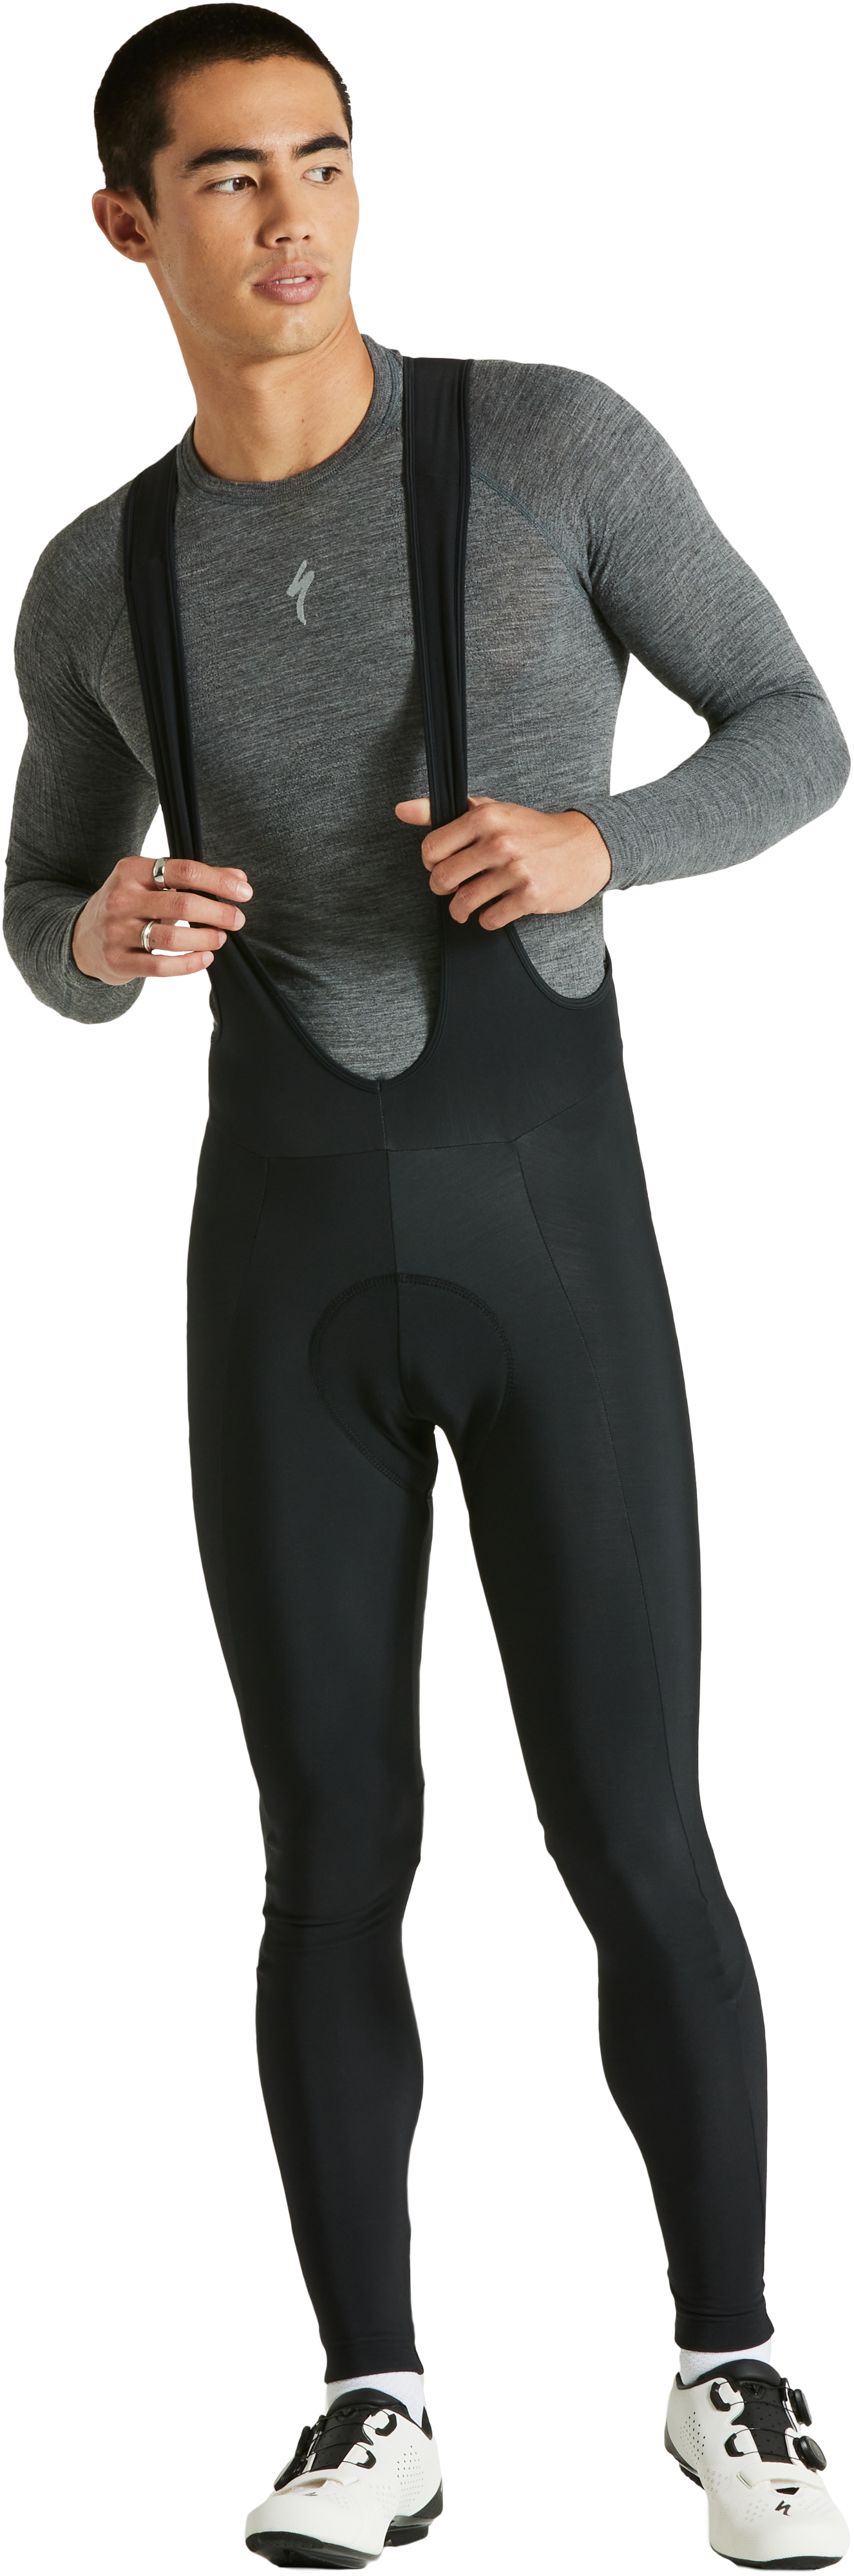 Men's Cycling Tights & Knickers